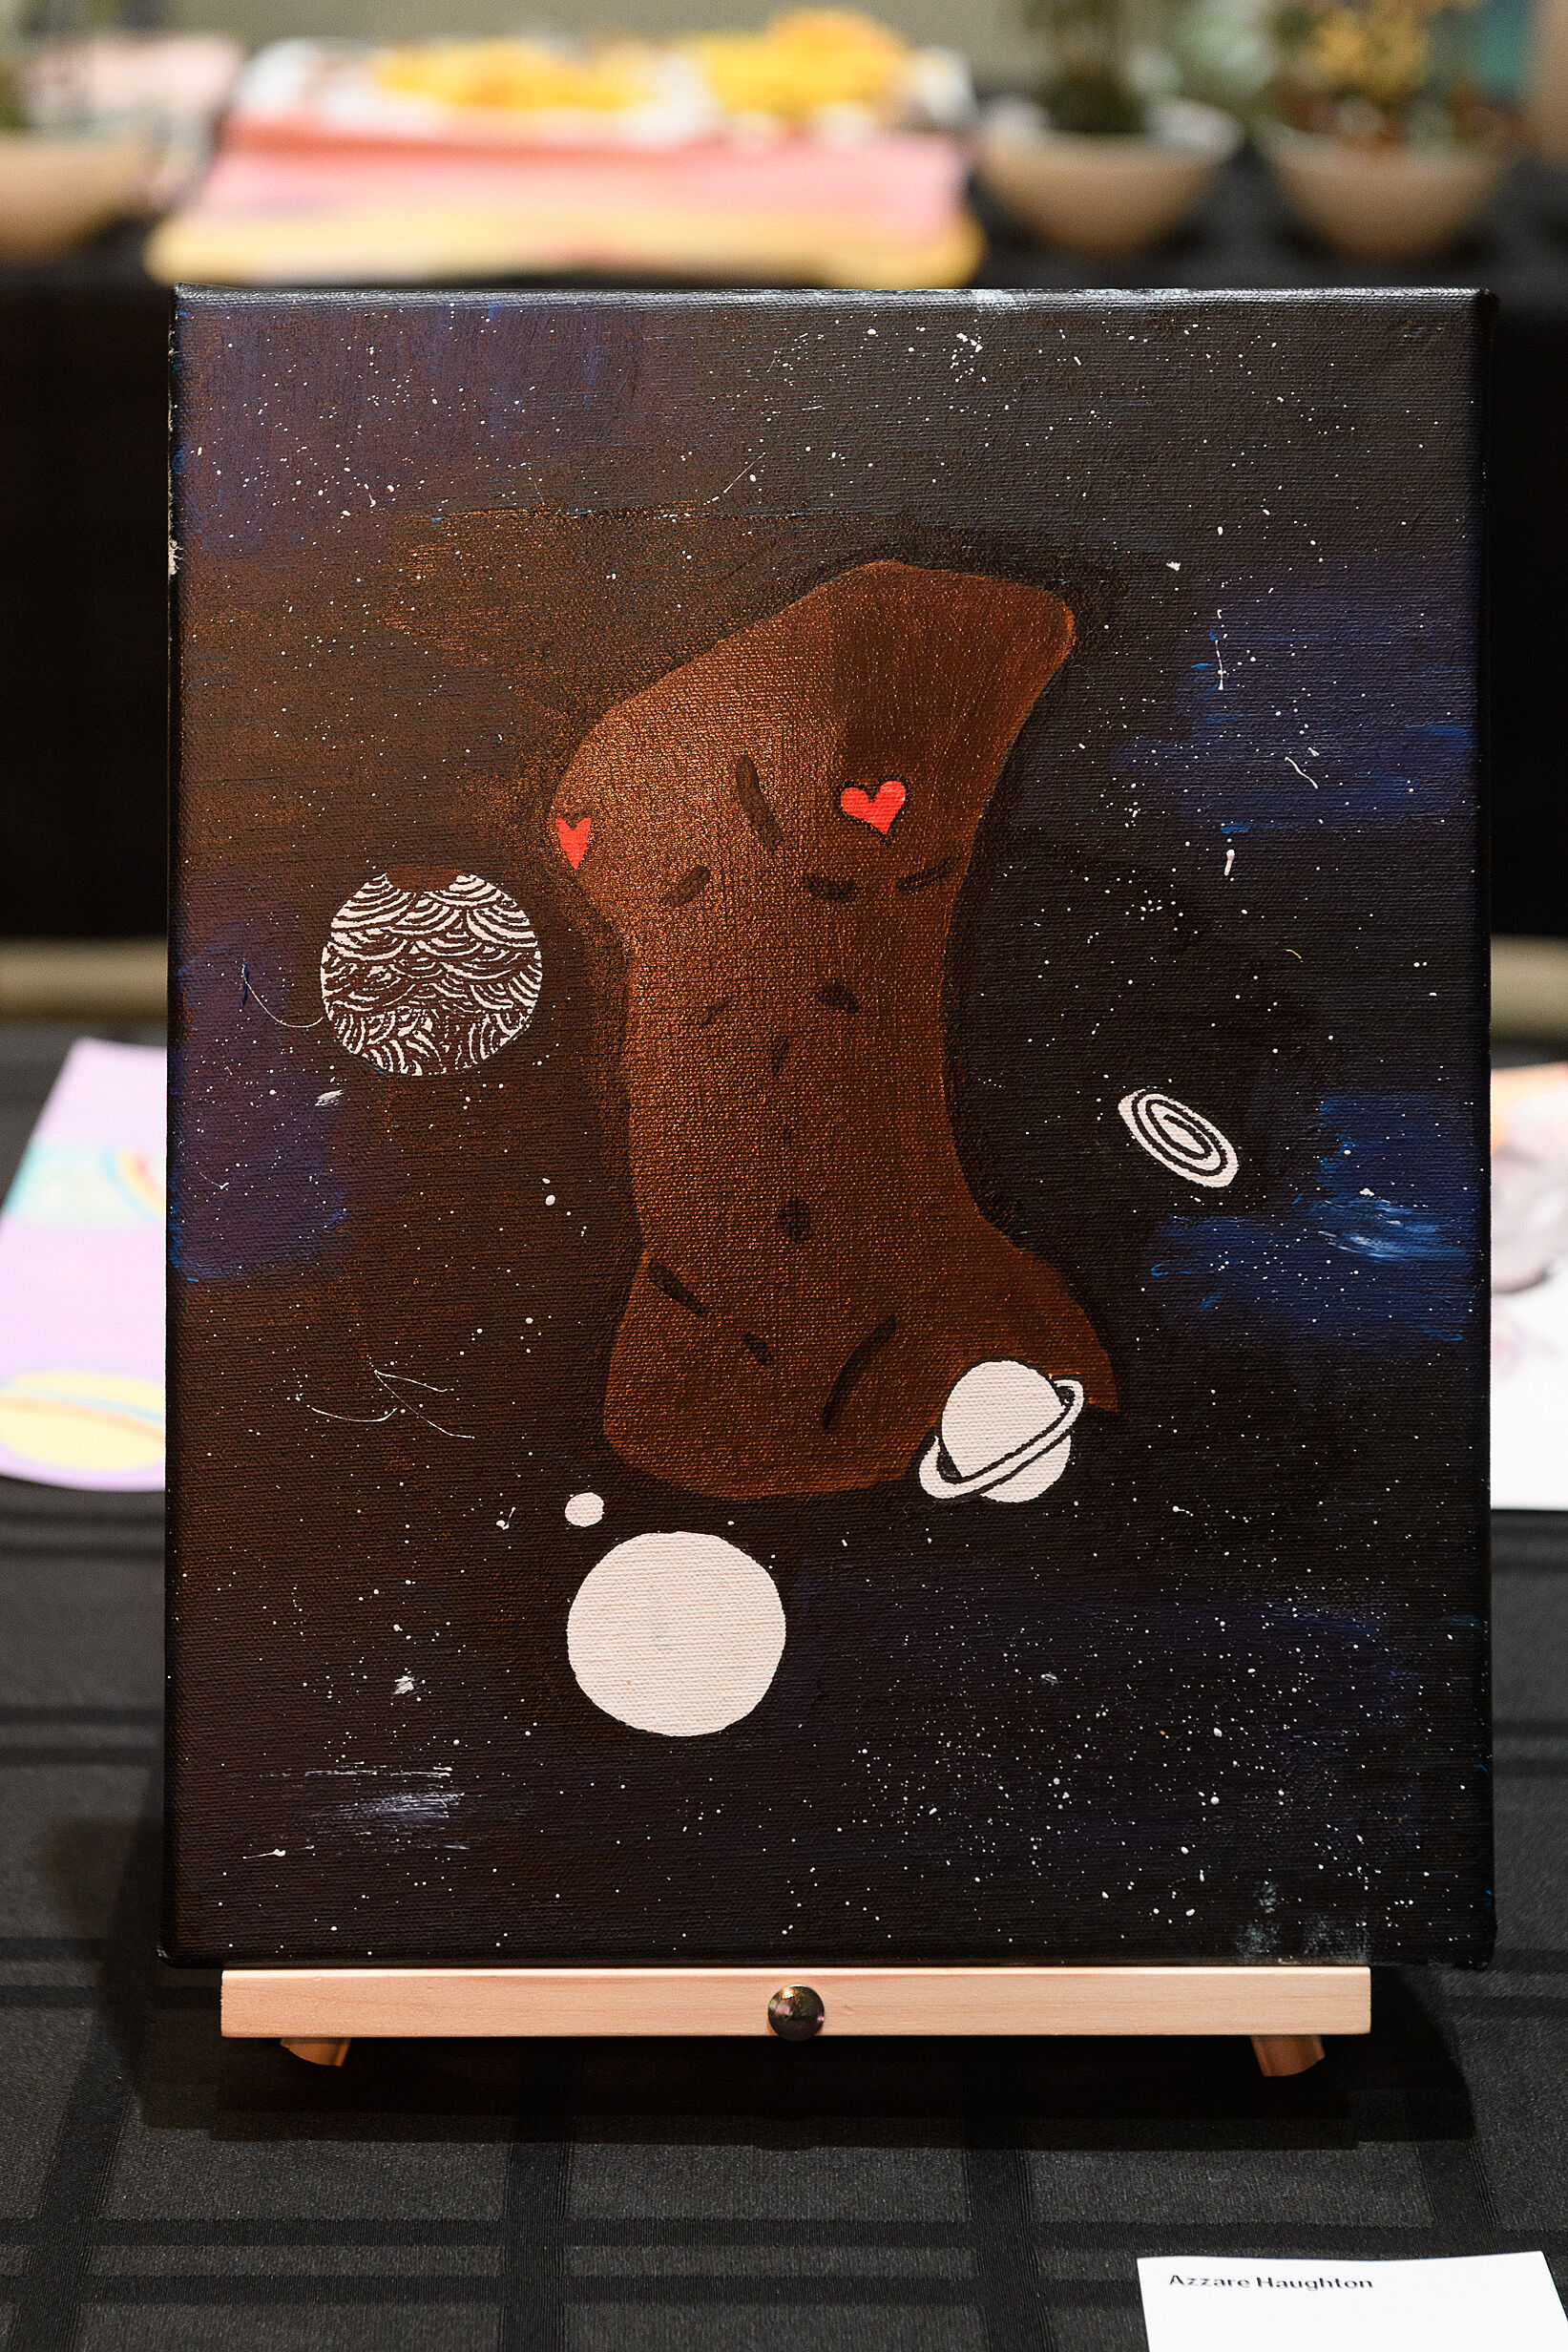 A torso painted in a space scene in dark colors.